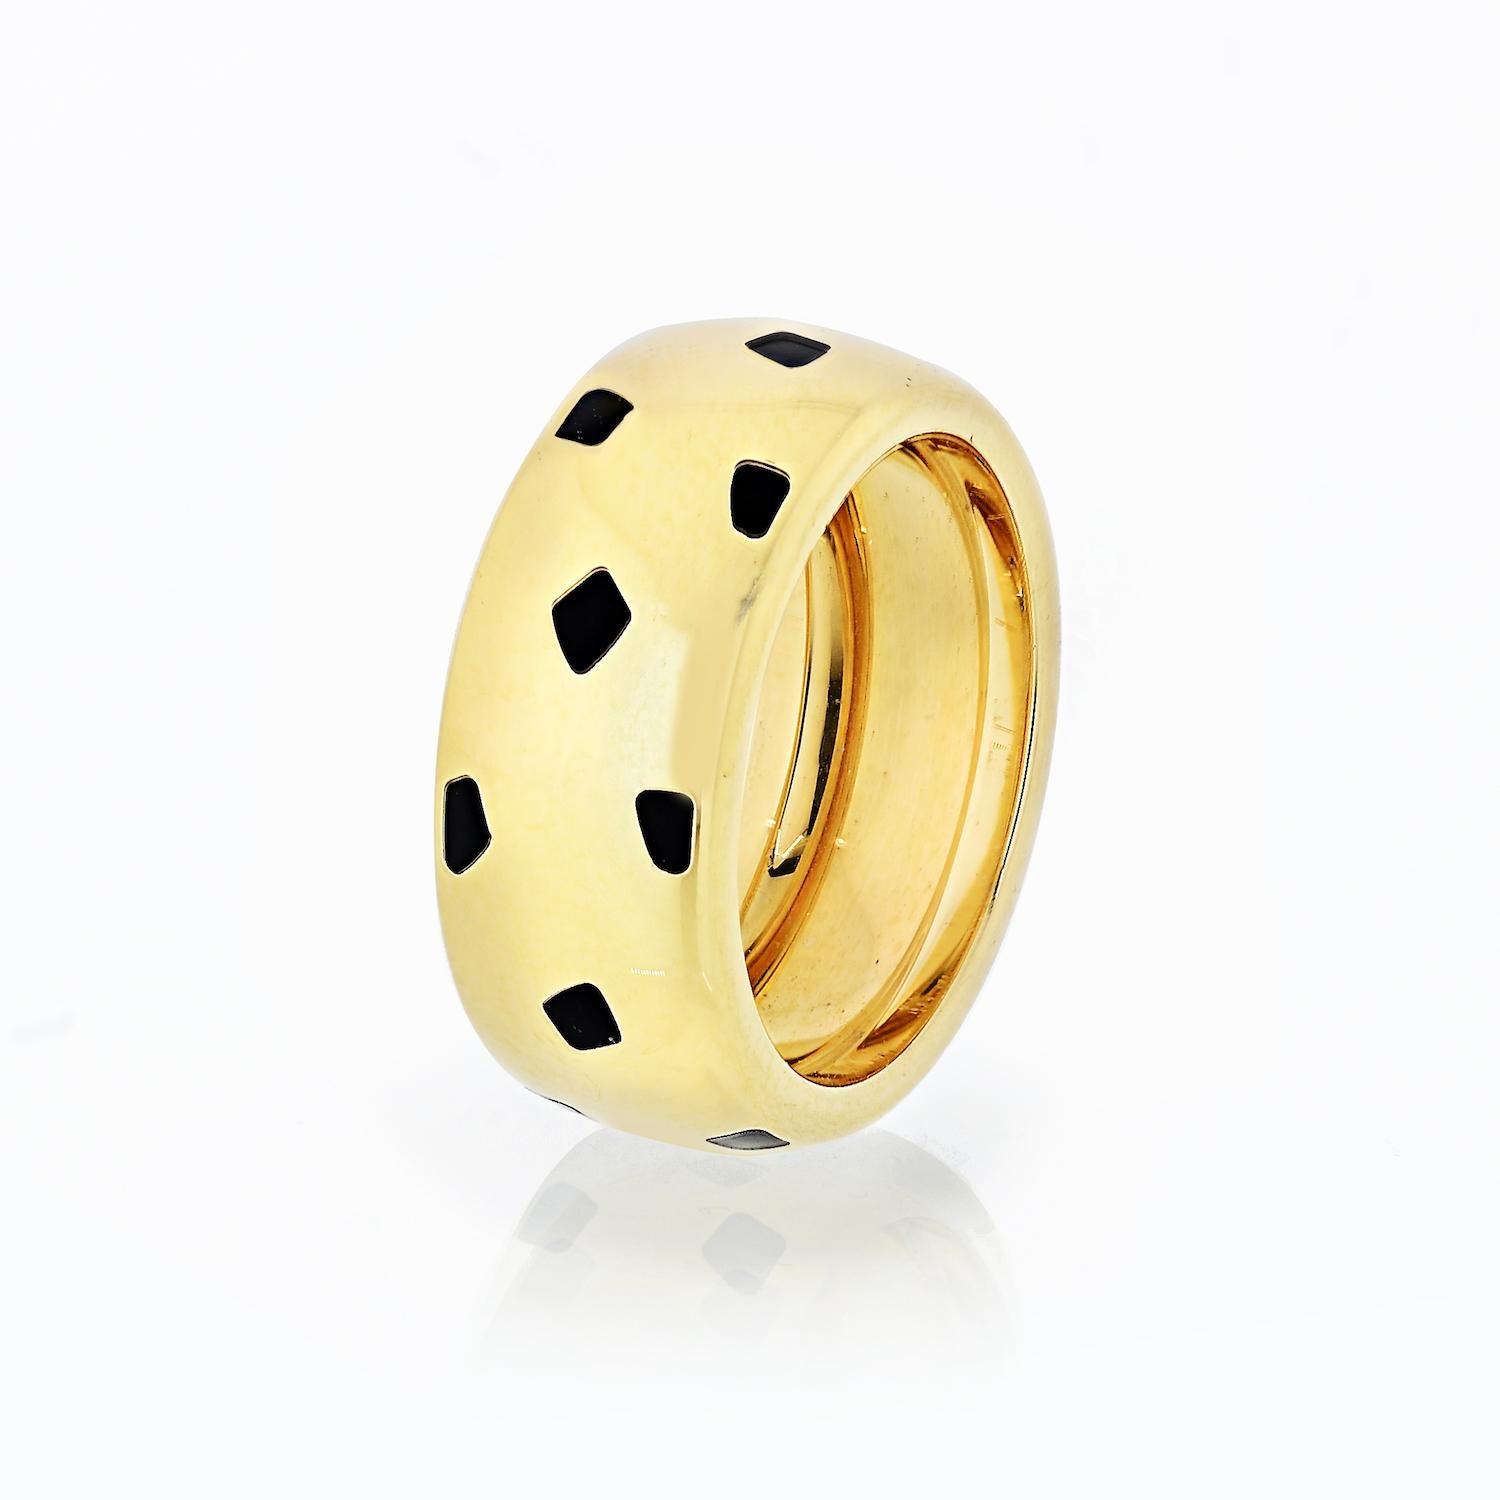 Panthere de Cartier ring 18K yellow gold black lacquer ring. Ring Width: 8.8mm. Ring size 54 US 7. Weight: 14.3g. Cartier's Panthere collection will always be so elegant and will never go out of style. Excellent pre-owned condition. Comes with box.